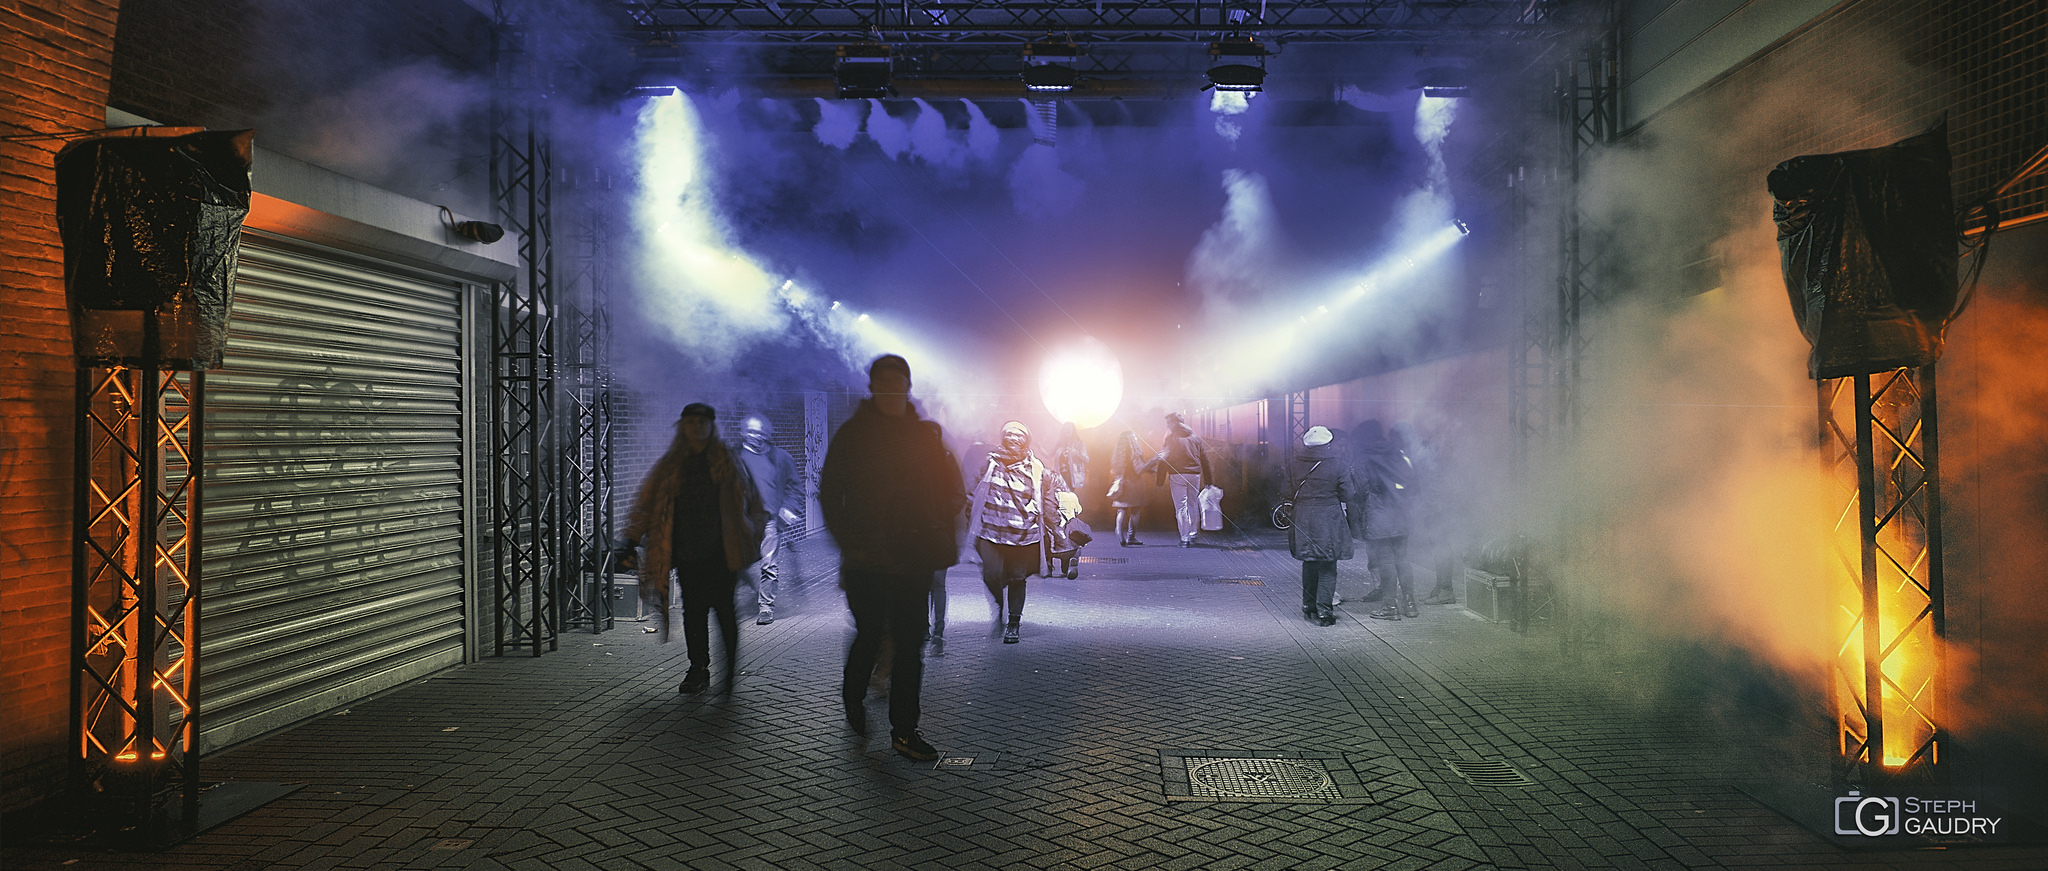 Festival, spectacle, conférence / Eindhoven glow 2017_11_18_224514